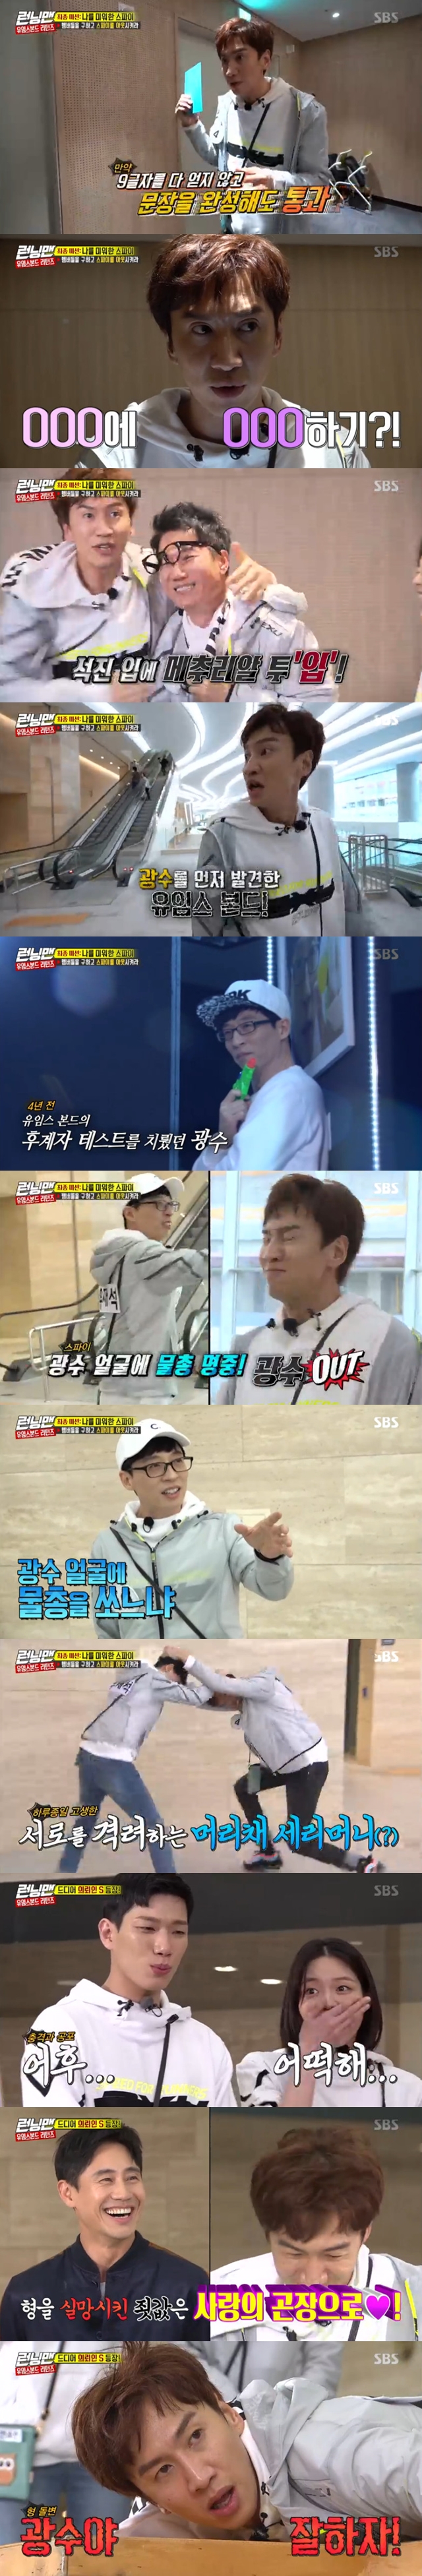 Bond was perfectly Risen.On April 28, SBS Running Man, My Special Money Race was held, and National MC Yoo Jae-Suk, who transformed into Yums Bond in four years, was brilliant.On the day of the invitation to the host S, Running Man members, guest Esom and Kim Kyung Nam started 100 million secret game.Each had to survive in an empty room for nine hours with minimal money, and if they didnt spend a penny for nine hours, they would give one person ten million or five.While everyone practiced abstinence due to expensive prices, Yoo Jae-Suk broke the silence and ordered a lunch box and ramen of 4 million One.Yoo Jae-Suk wasnt the only one who spent money; the storm spending of the fire moths quickly disappeared 80 million One.Among them, Esom secretly handed Yoo Jae-Suk a note, which Esom sent: You are Yumes Bond.Theres a Spy on your mind. With Bond, Esom was Bond Girl, a Bond helper.Bond Girl, who was to perform the Uyms Bond and Hidden Mission, was able to win by finding Spy before Yoo Jae-Suks In-N-Out Burger.It was four years of intelligence activity, but it was perfectly revived. Four years ago, Yoo Jae-Suk was a big player, including one shot of Spy with a water gun.Yoo Jae-Suk, who had become a Bond for a long time, was embarrassed because he did not have a water gun in his hand, and called the canteen to ask him to bring all the supplies he needed for his Bond activity.Eventually, I bought a 5 million-one water gun and a 5 million-one solution and started my business in earnest.Yoo Jae-Suk, who left the secret room, won first place in the shoe thrower game and escaped the crisis of being inspected by the members.As soon as Risen did, Bond Yoo Jae-Suk began to suspect Kim Gyeong-nam as Spy.Yoo Jae-Suk also had to find a safe with his name on the mission site and save members who were infected in the dondog.In ten minutes, shooting a water gun on a name tag was a method of fighting the Dondog.One person is infected in Dondog, In-N-Out Burger, or if the Bond is in-N-Out Burger by Spy, the race is immediately stopped.As soon as he found out Spy, he had to shoot Spy in the face and in-N-Out Burger, and Bond Girl had to save the Infected member.First, Yang Se-chan found the safe, and Yoo Jae-Suk found Yang Se-chan and secretly shot the water gun.Yang Se-chan, who did not notice that Yoo Jae-Suk shot a water gun in his name tag, was quarantined for treatment without knowing the English language.Lee Kwang-soo, who found the second safe, was also shot by Yoo Jae-Suk and moved to the isolation room.Next, Yoo Jae-Suk was in a situation where he had to shoot up to Song Ji-hyo following Haha.Yoo Jae-Suk, who succeeded in the Song Ji-hyo sniper, had to sniper to Ji Suk-jin without even finding Haha.Yoo Jae-Suk managed to shoot down a furiously resisting Haha with 30 seconds left.While Yoo Jae-Suk was shooting water guns, it was revealed that Spy of the day was Lee Kwang-soo, who was eliminated from the successor to Yumes four years ago.Shin Ha-gyun, who was identified as host S, said, Lets make a race where Lee Kwang-soo can win. After four years ago, he was selected as a successor to Yumes Bond,I wonder why I did not give him another chance. I do not doubt the ability of the madman. Please make him an opportunity to revenge him. Lee Kwang-soo was able to get out again and wander around after being quarantined by a water gun.Spy Lee Kwang-soo will win 100 million if he wins and will perform a single penalty if he fails.However, Lee Kwang-soo had to figure out how to get Yoo Jae-Suk to In-N-Out Burger.The first command of Spy Lee Kwang-soo was to purchase nine quail eggs, and each time the members put quail eggs somewhere in their bodies, they could get hints that they could in-N-Out Burger Yoo Jae-Suk.Esom found Lee Kwang-soo, who wandered around with a water gun, and was suspicious.Esom, who had to tell Yoo Jae-Suk that Lee Kwang-soo was Spy, ran hard; as a result, Yoo Jae-Suk finally noticed the Spy identity.So the full chase began.Lee Kwang-soo, who has not yet got a hint to catch Yoo Jae-Suk, ran away once, and Yoo Jae-Suk also went to shoot Kim Kyung-nam with a water gun when Kim Kyung-nam was reported to have found the safe.Lee Kwang-soo, who learned the Yoo Jae-Suk In-N-Out Burger method of breaking eggs on the Yoo Jae-Suk head at that time, started again to catch Yoo Jae-Suk.Esom chased Lee Kwang-soo, and Yoo Jae-Suk, who discovered Lee Kwang-soo again thanks to Esom, shot Lee Kwang-soo in the face at the end of twists and turns.Lee Kwang-soo, who waited so long for four years, fell apart with a flak of eggs.After a six-gun battle to catch each others hair, Yoo Jae-Suk eventually won the race final.bak-beauty